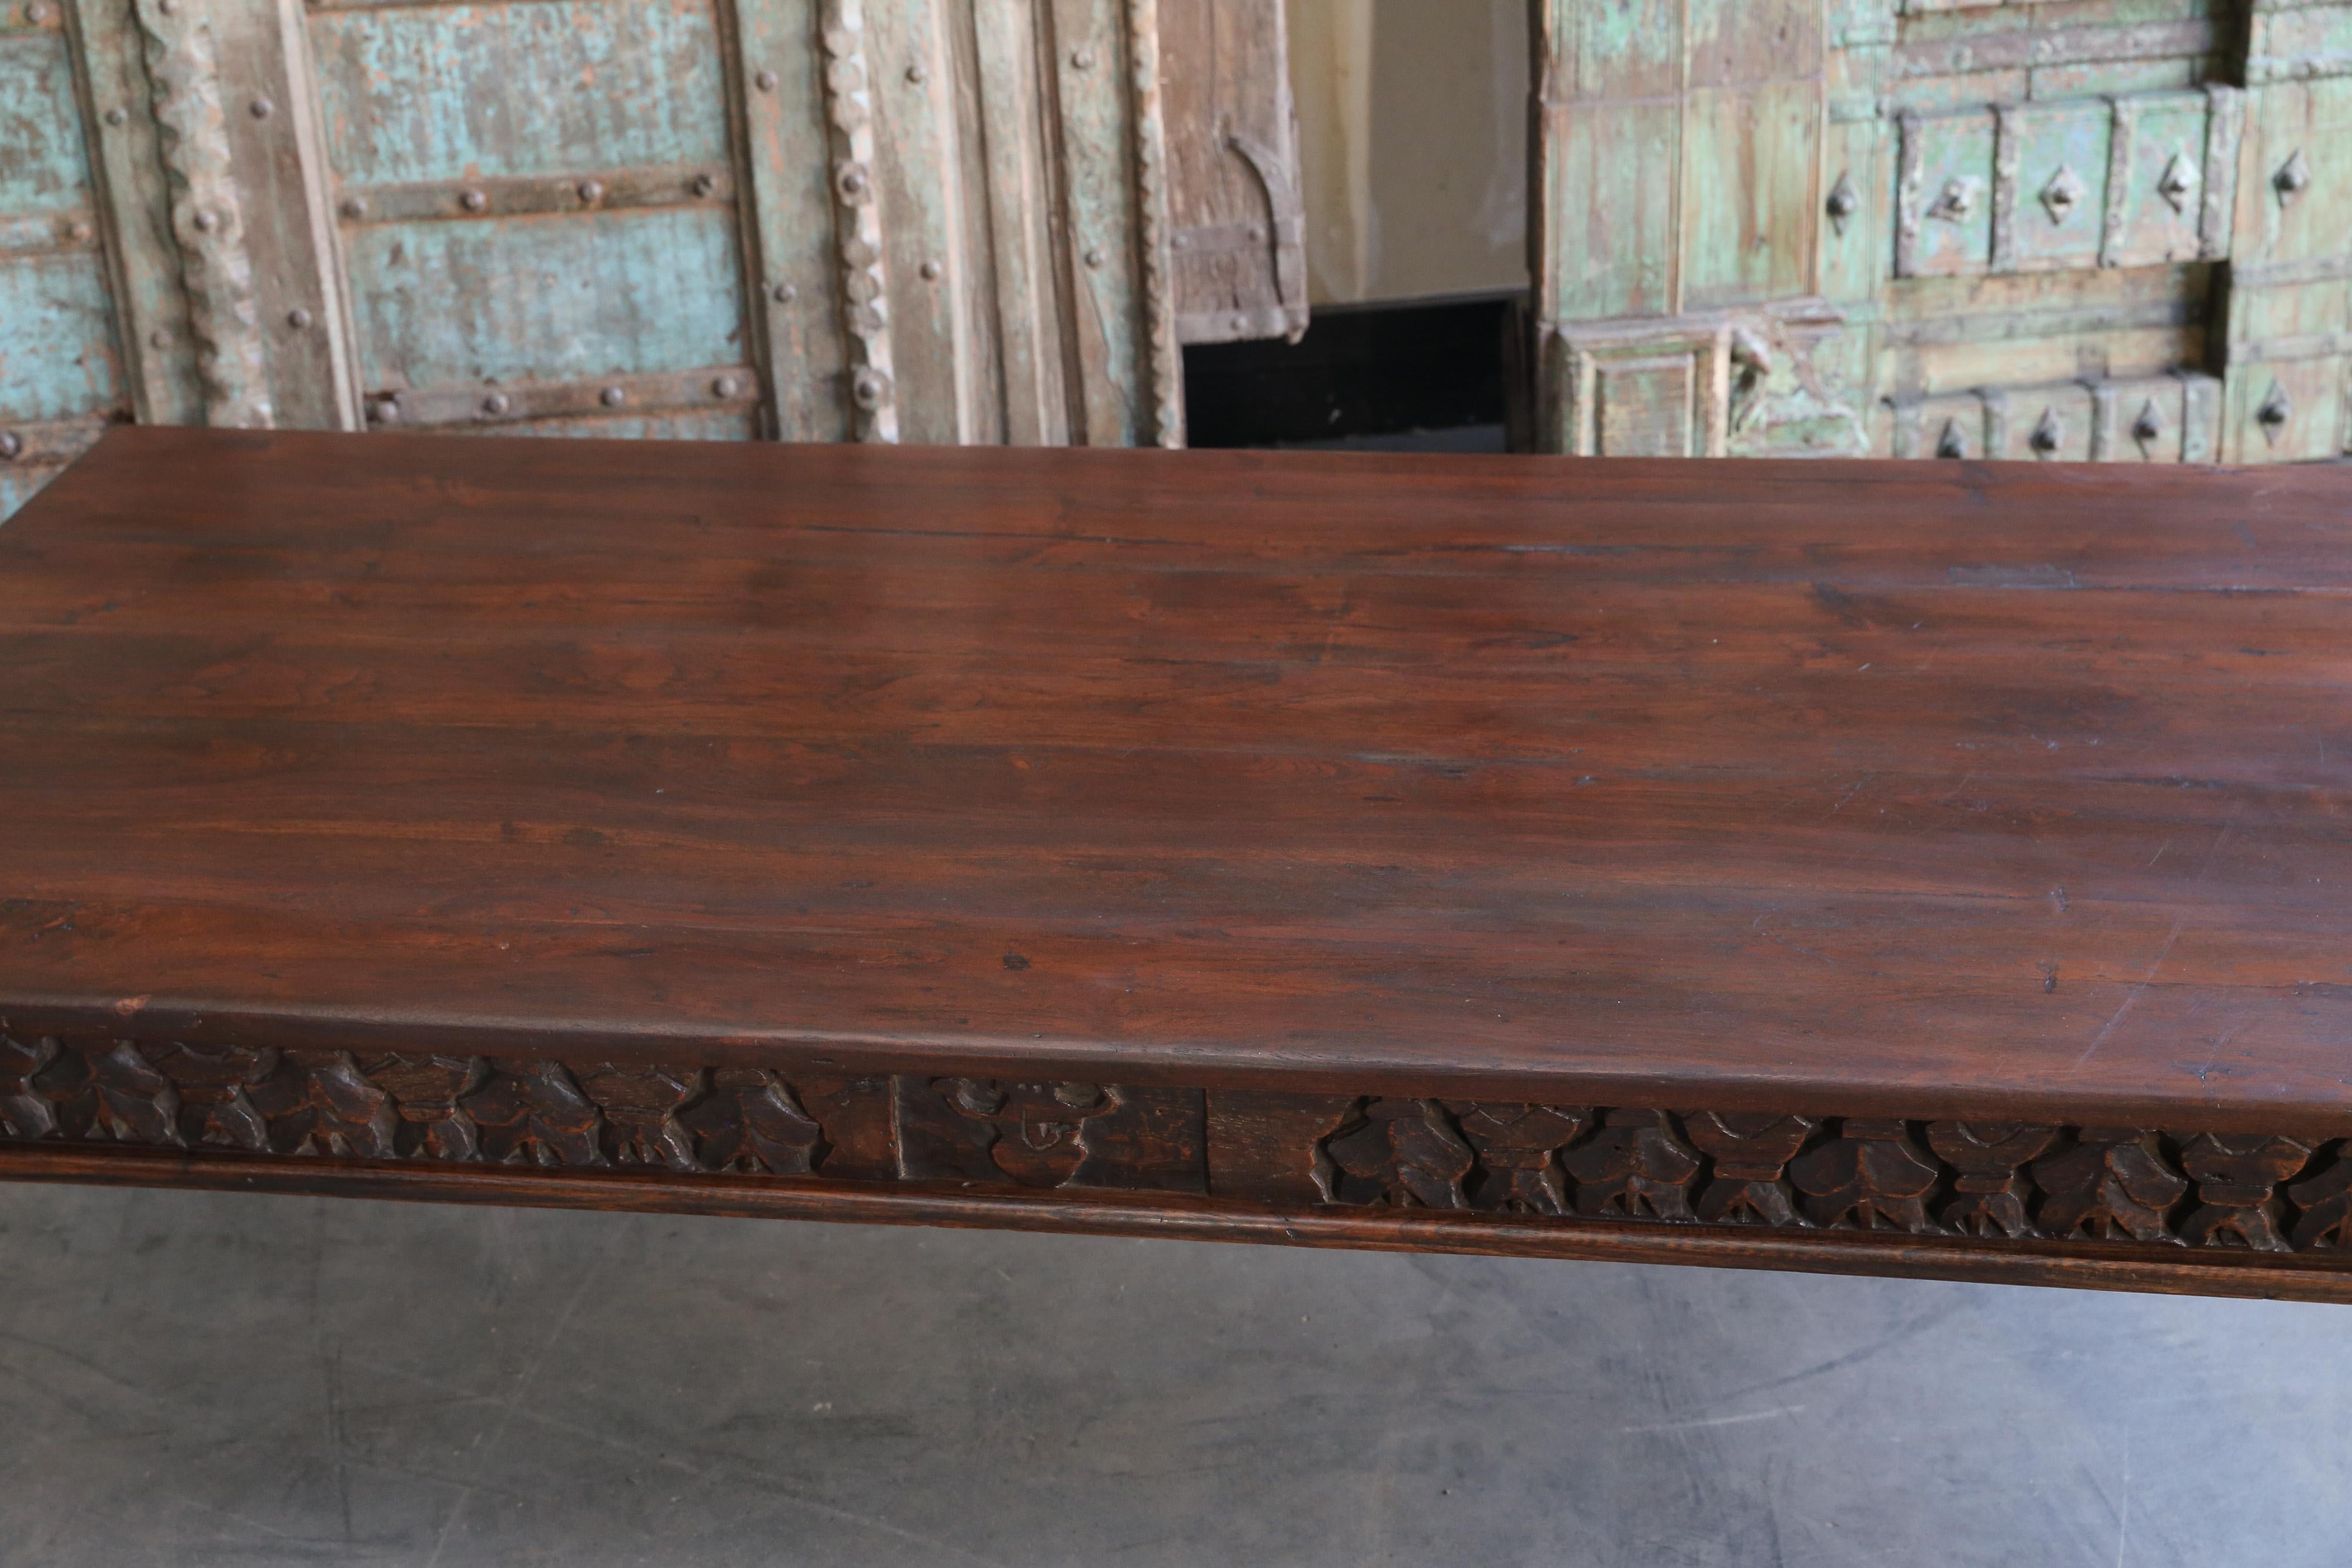 19th Century Idealistic Solid Teak Wood Coffee Table from a Tea Plantation For Sale 1